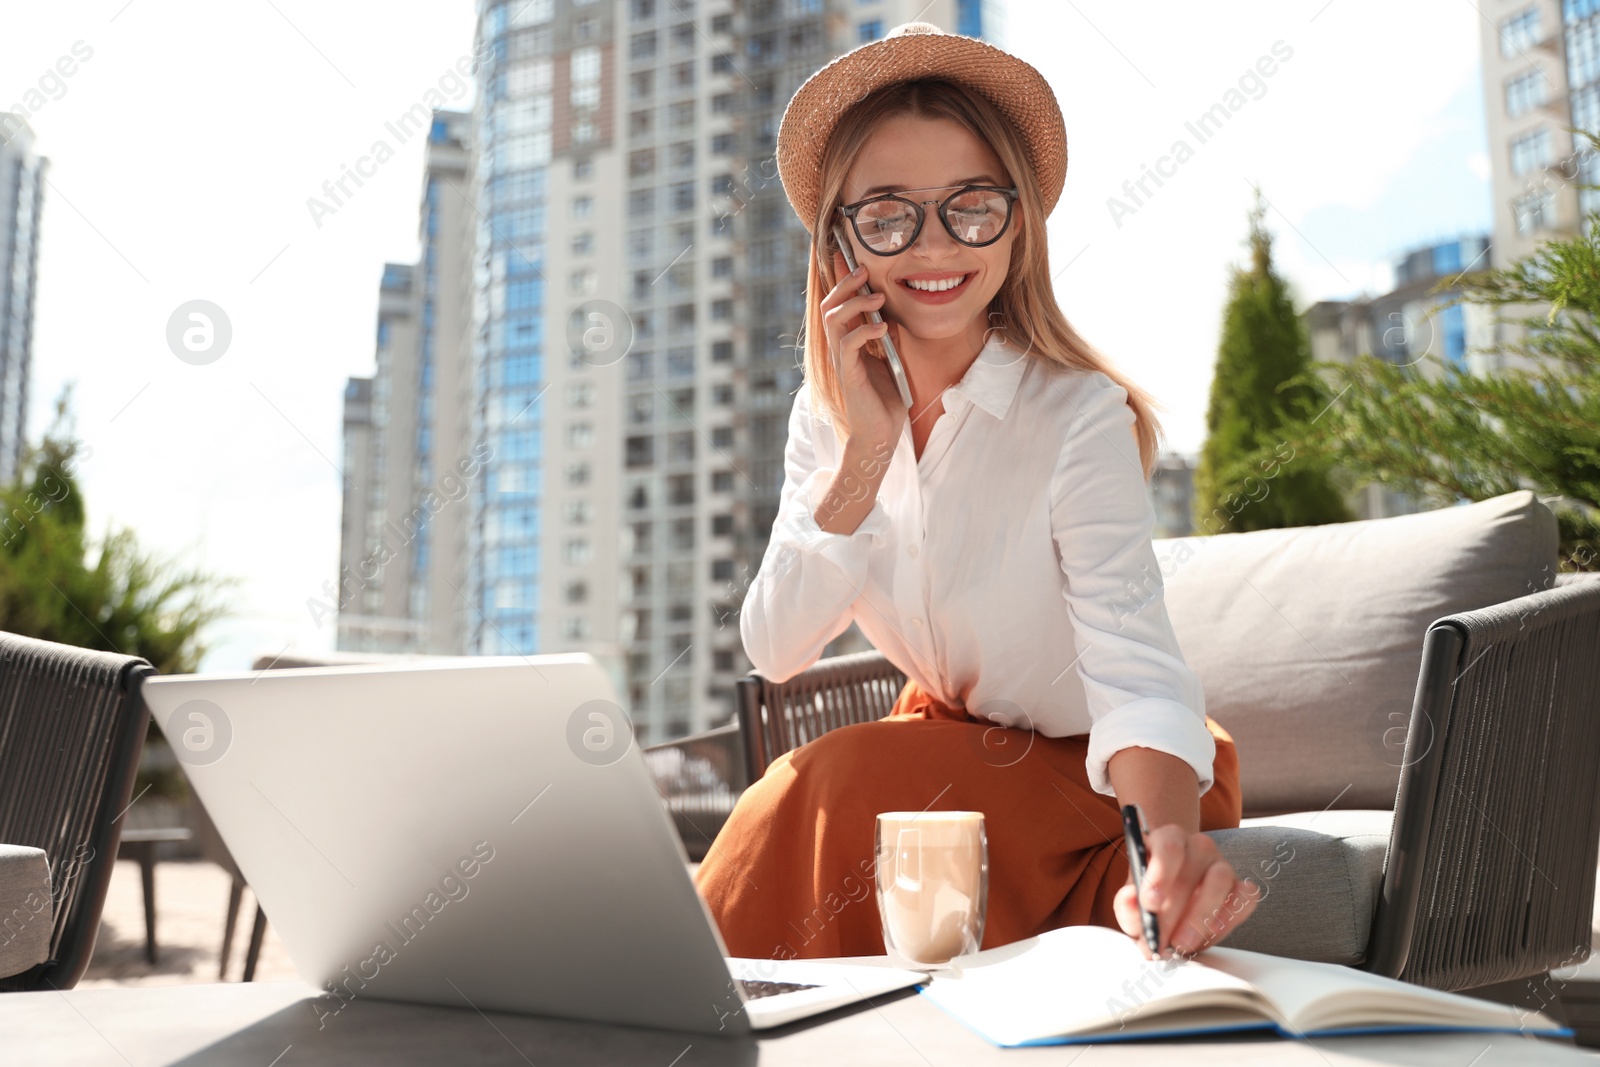 Photo of Beautiful woman with laptop talking on phone at outdoor cafe